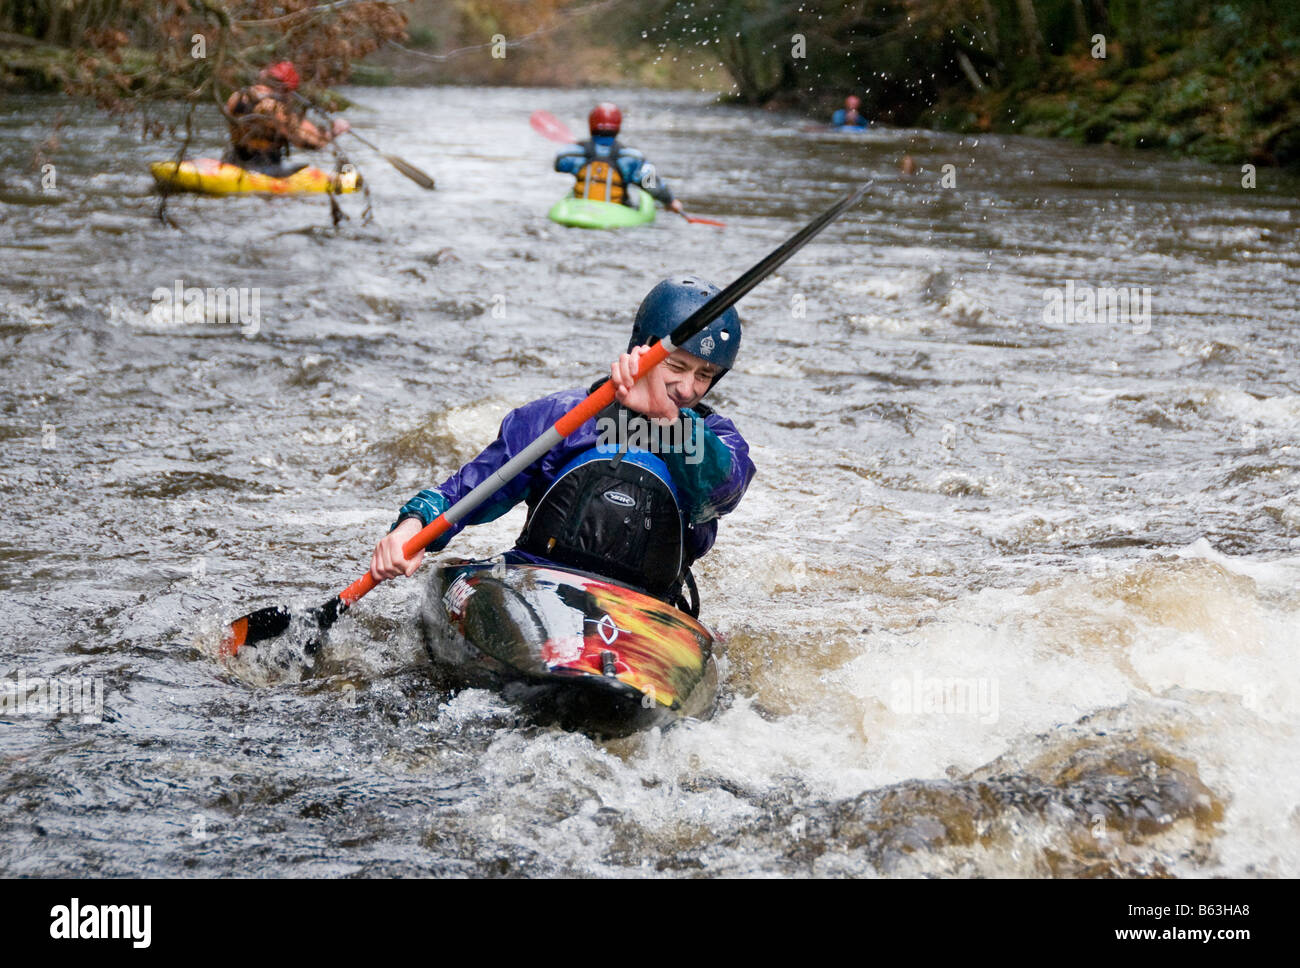 Kayaking Uk High Resolution Stock Photography and Images - Alamy